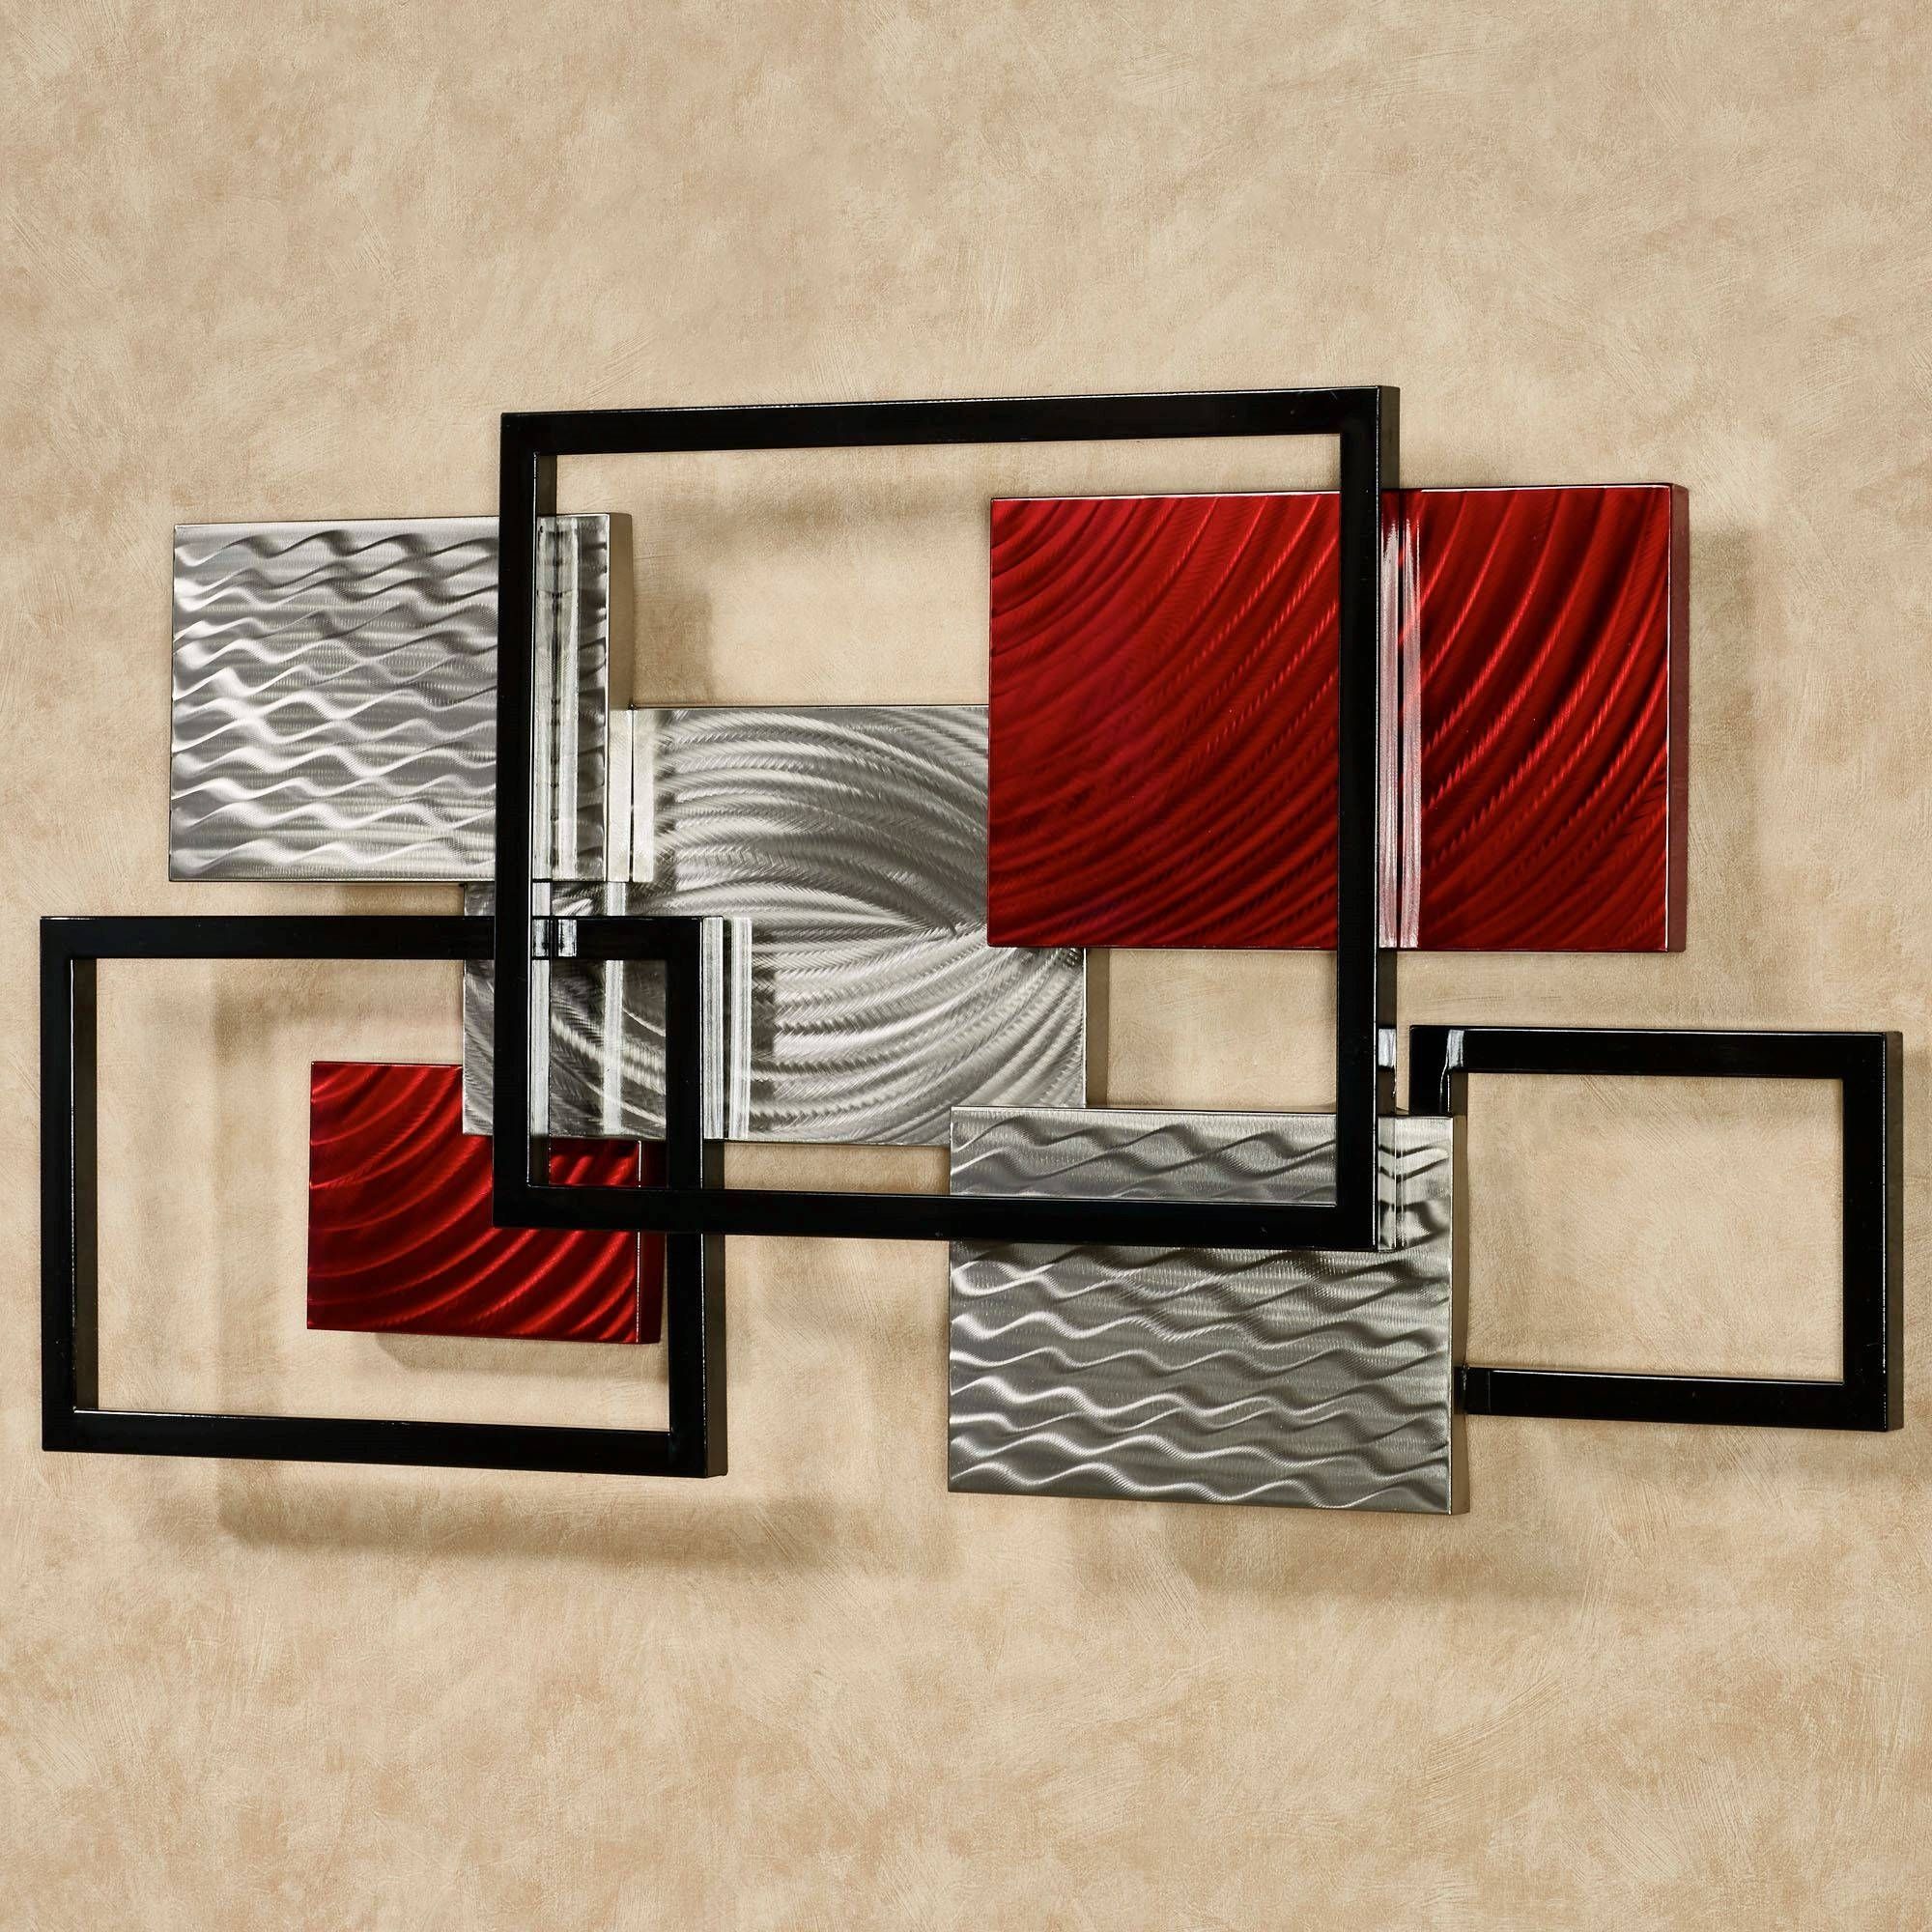 Framed Array Indoor Outdoor Abstract Metal Wall Sculpture In Most Current Modern Abstract Metal Wall Art Sculpture (View 2 of 20)